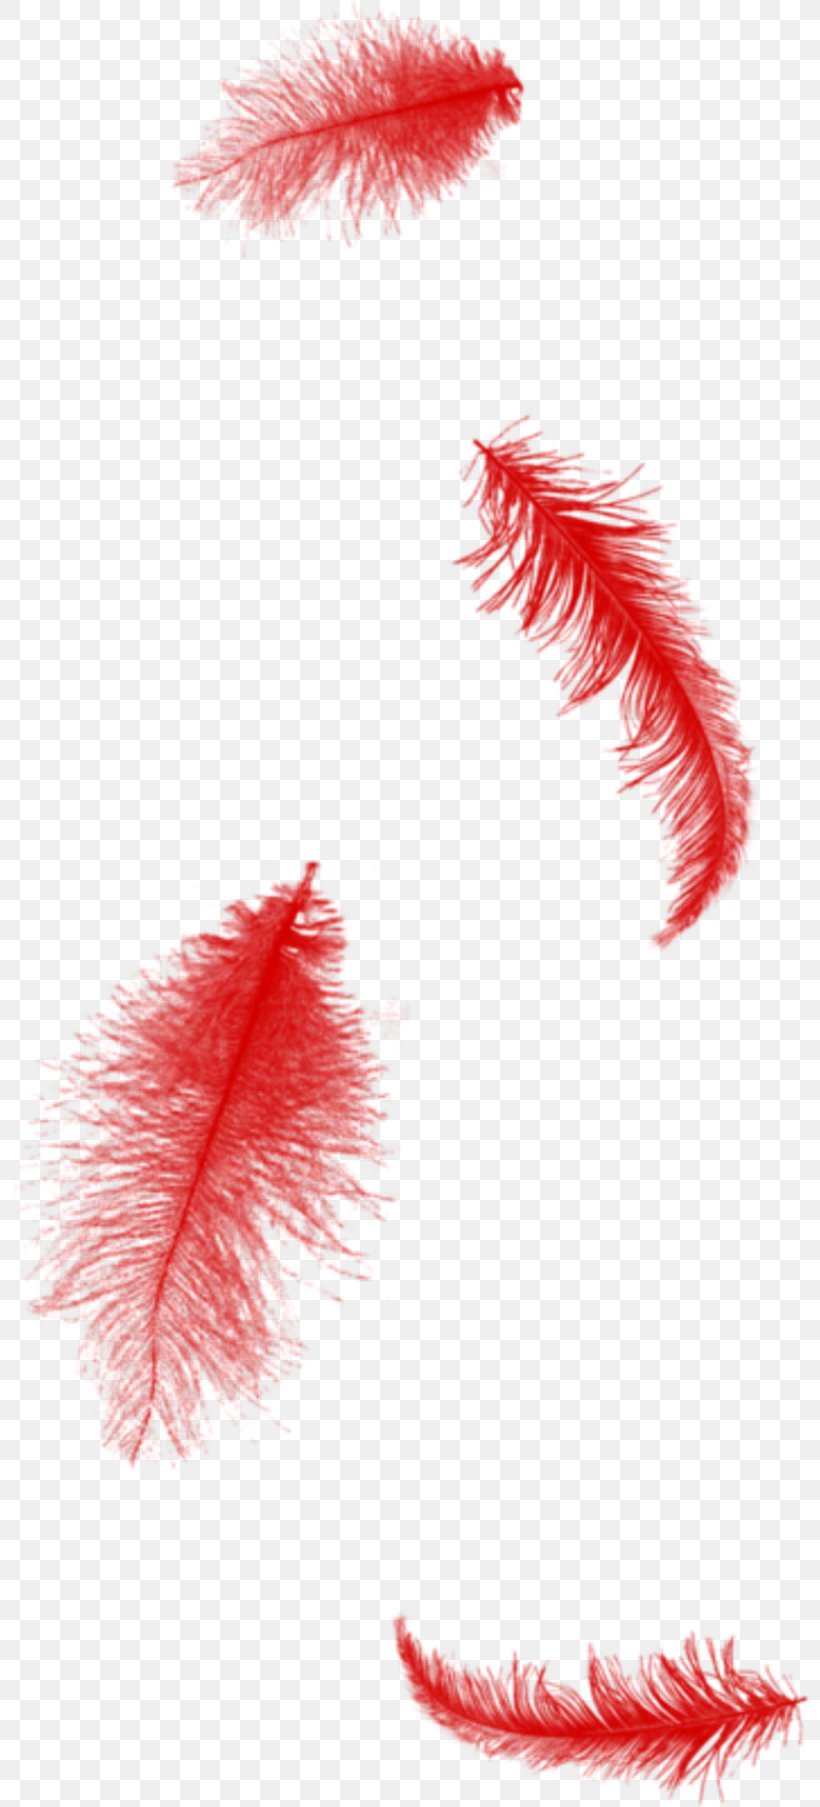 Feather Desktop Wallpaper Clip Art, PNG, 800x1807px, Feather, Quill, Red Download Free